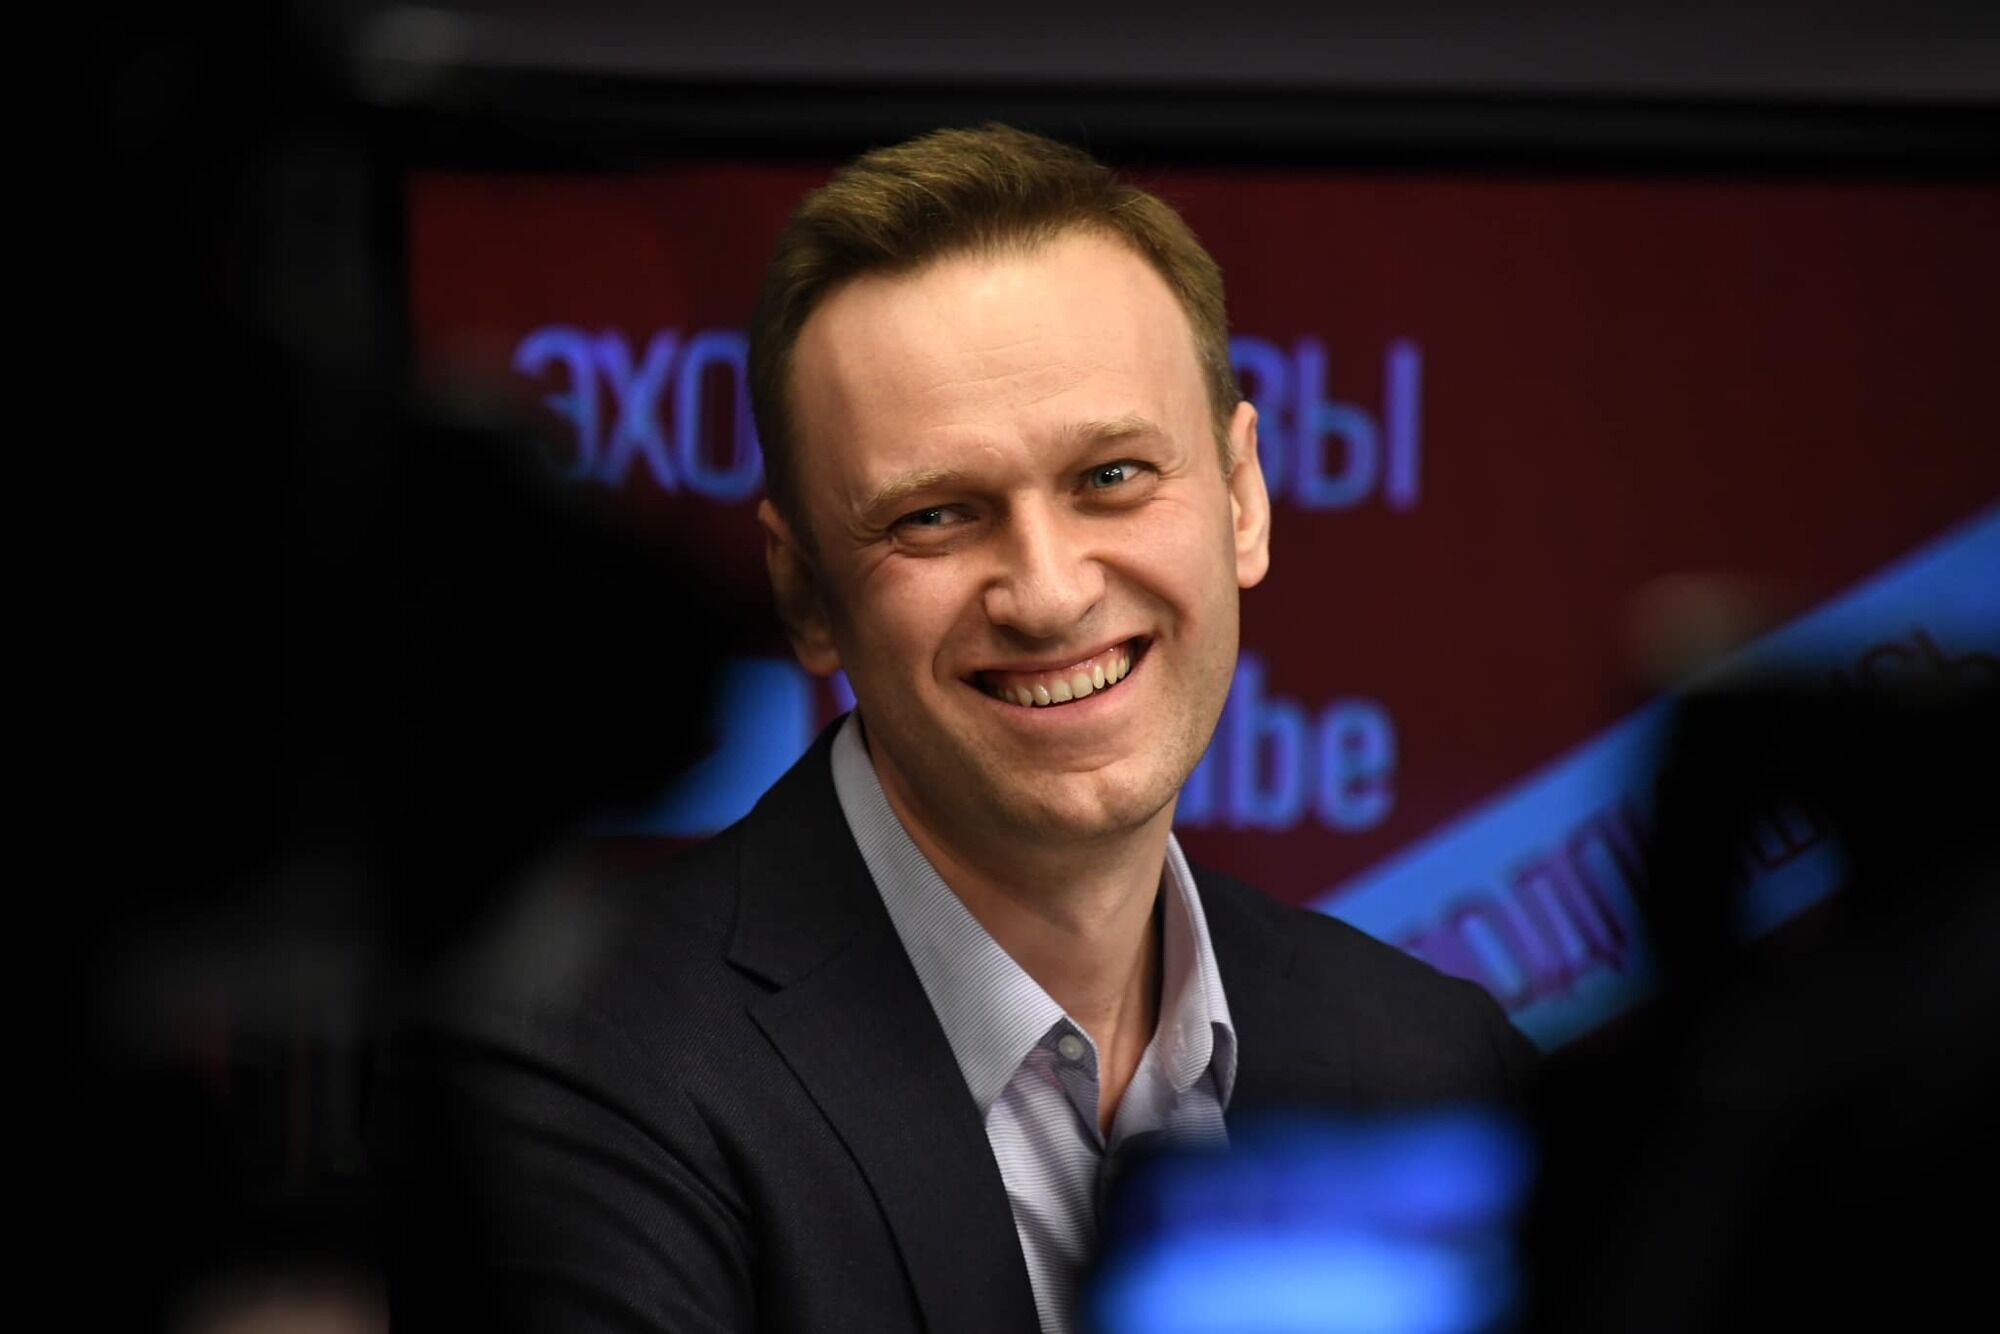 Navalny died in a penal colony